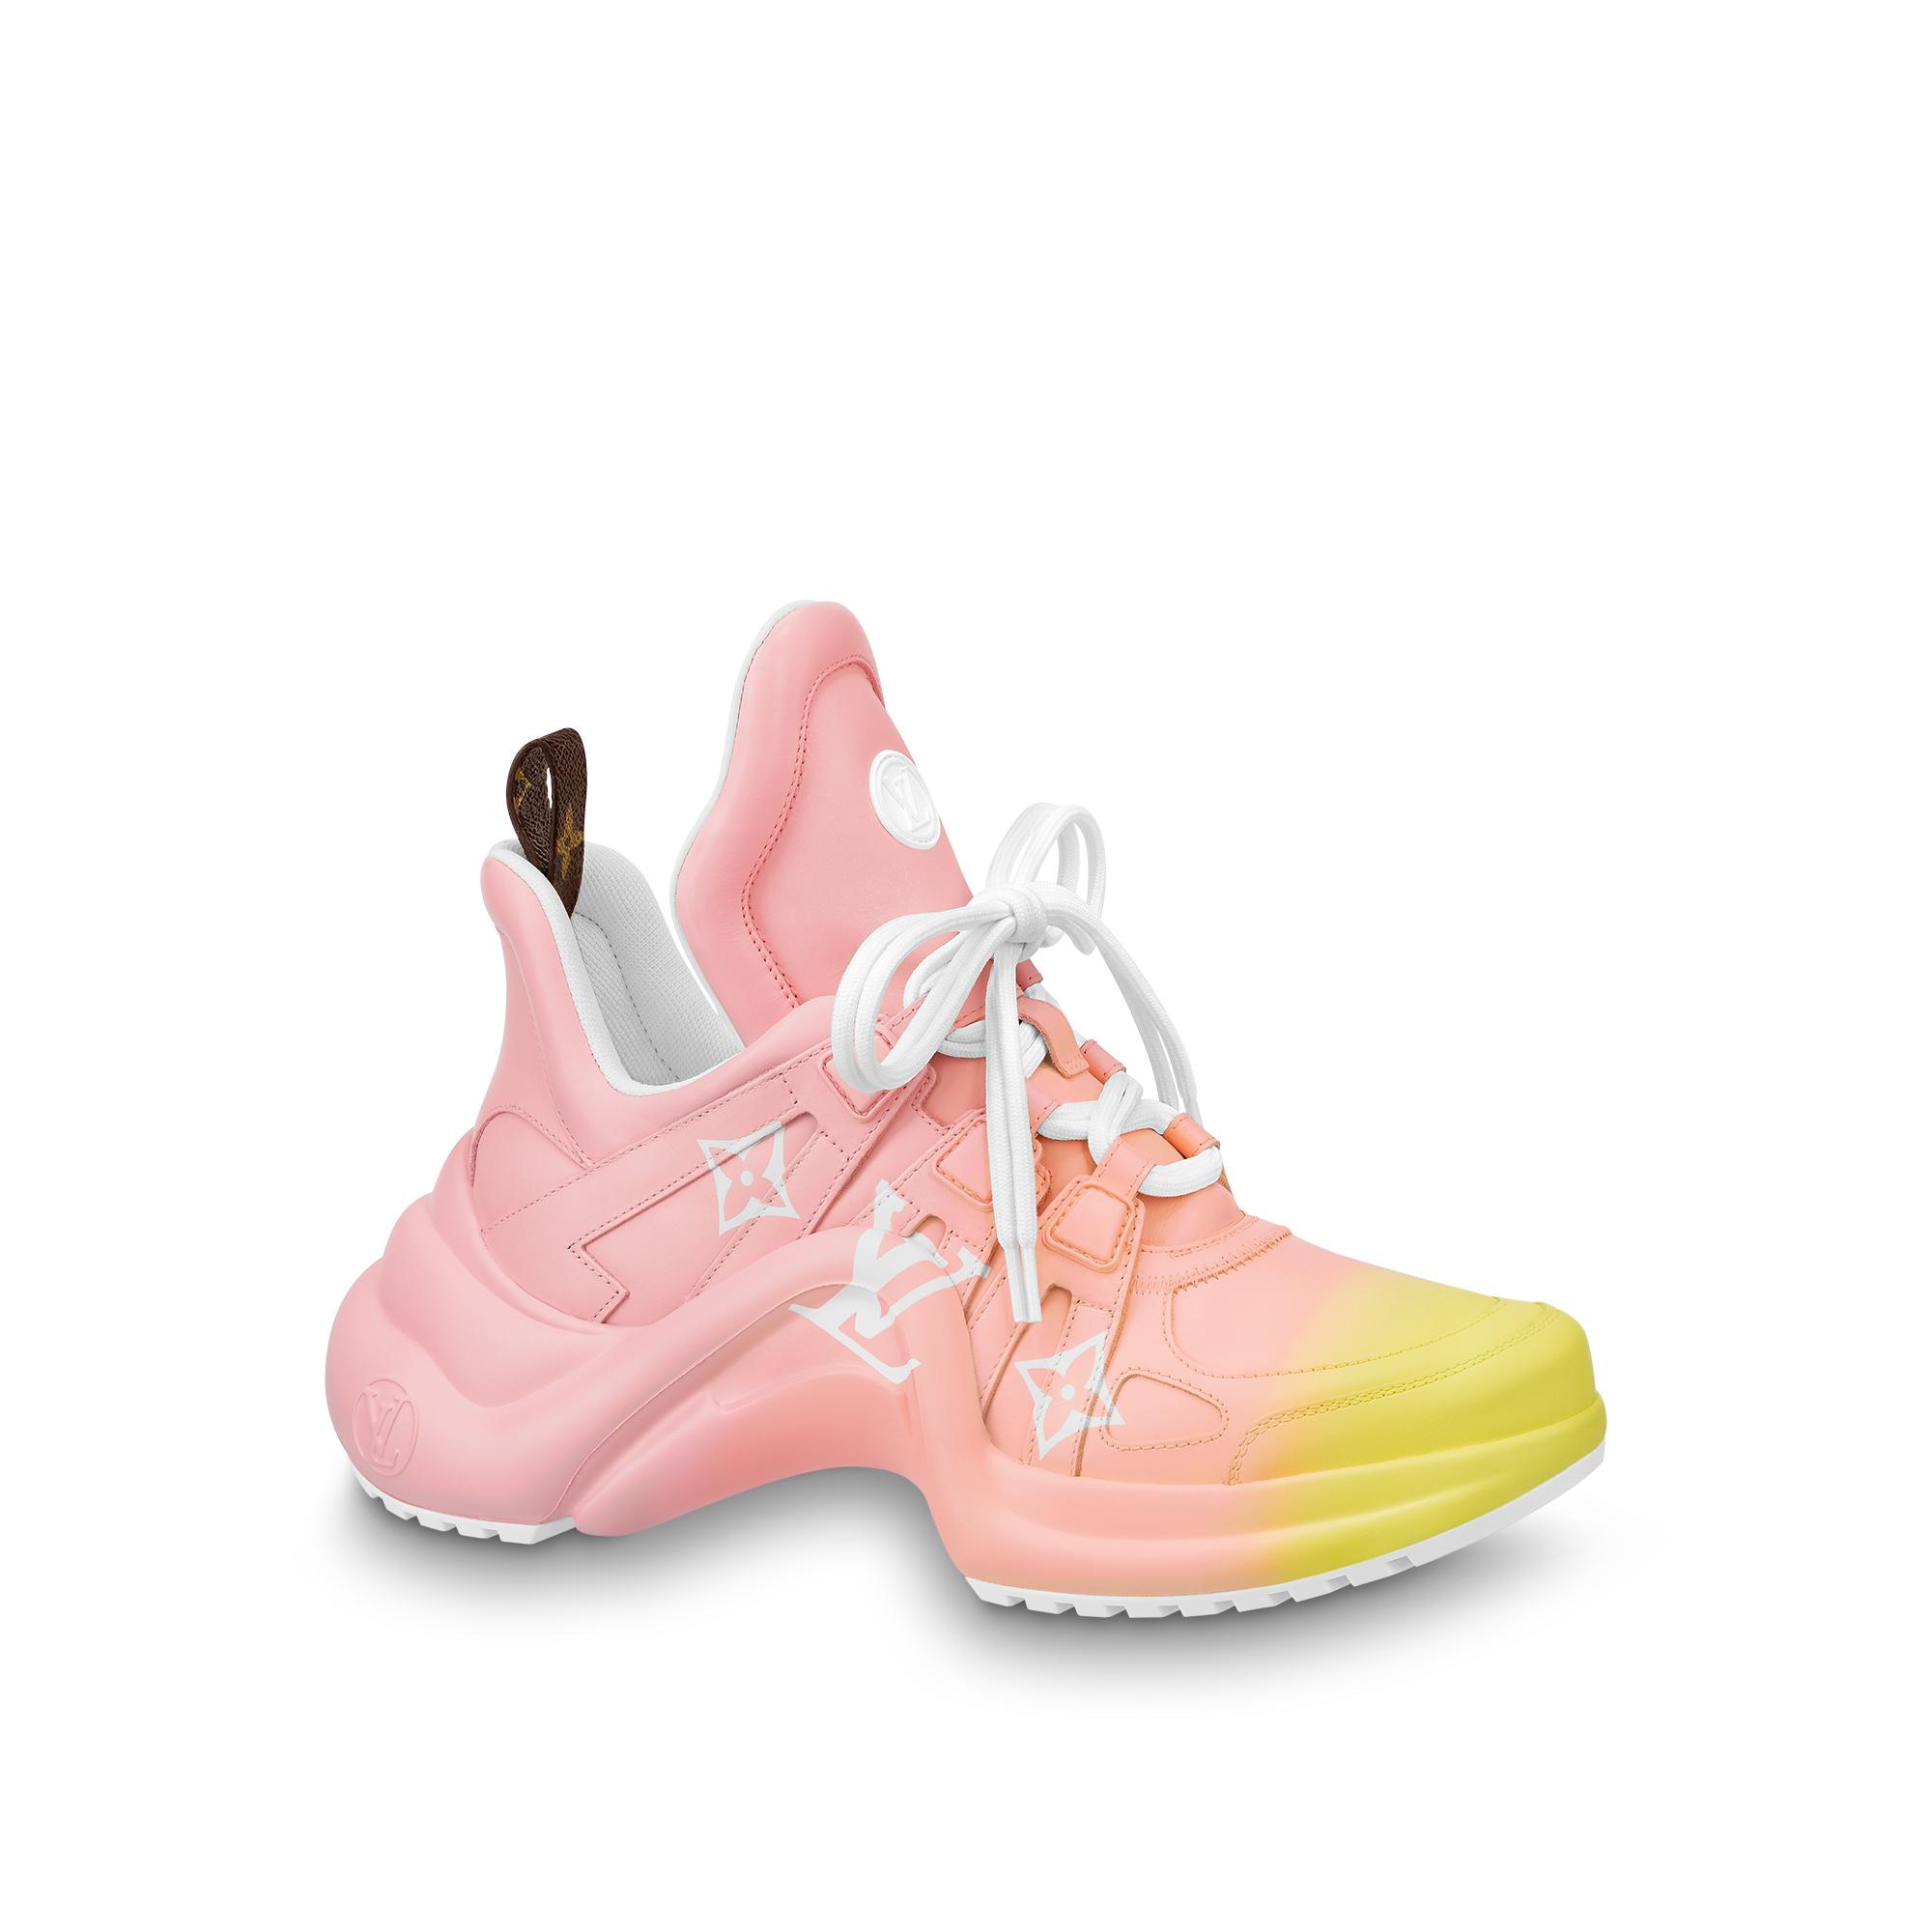 Louis Vuitton LV Archlight Sneaker in Rose - Shoes 1A8SYA